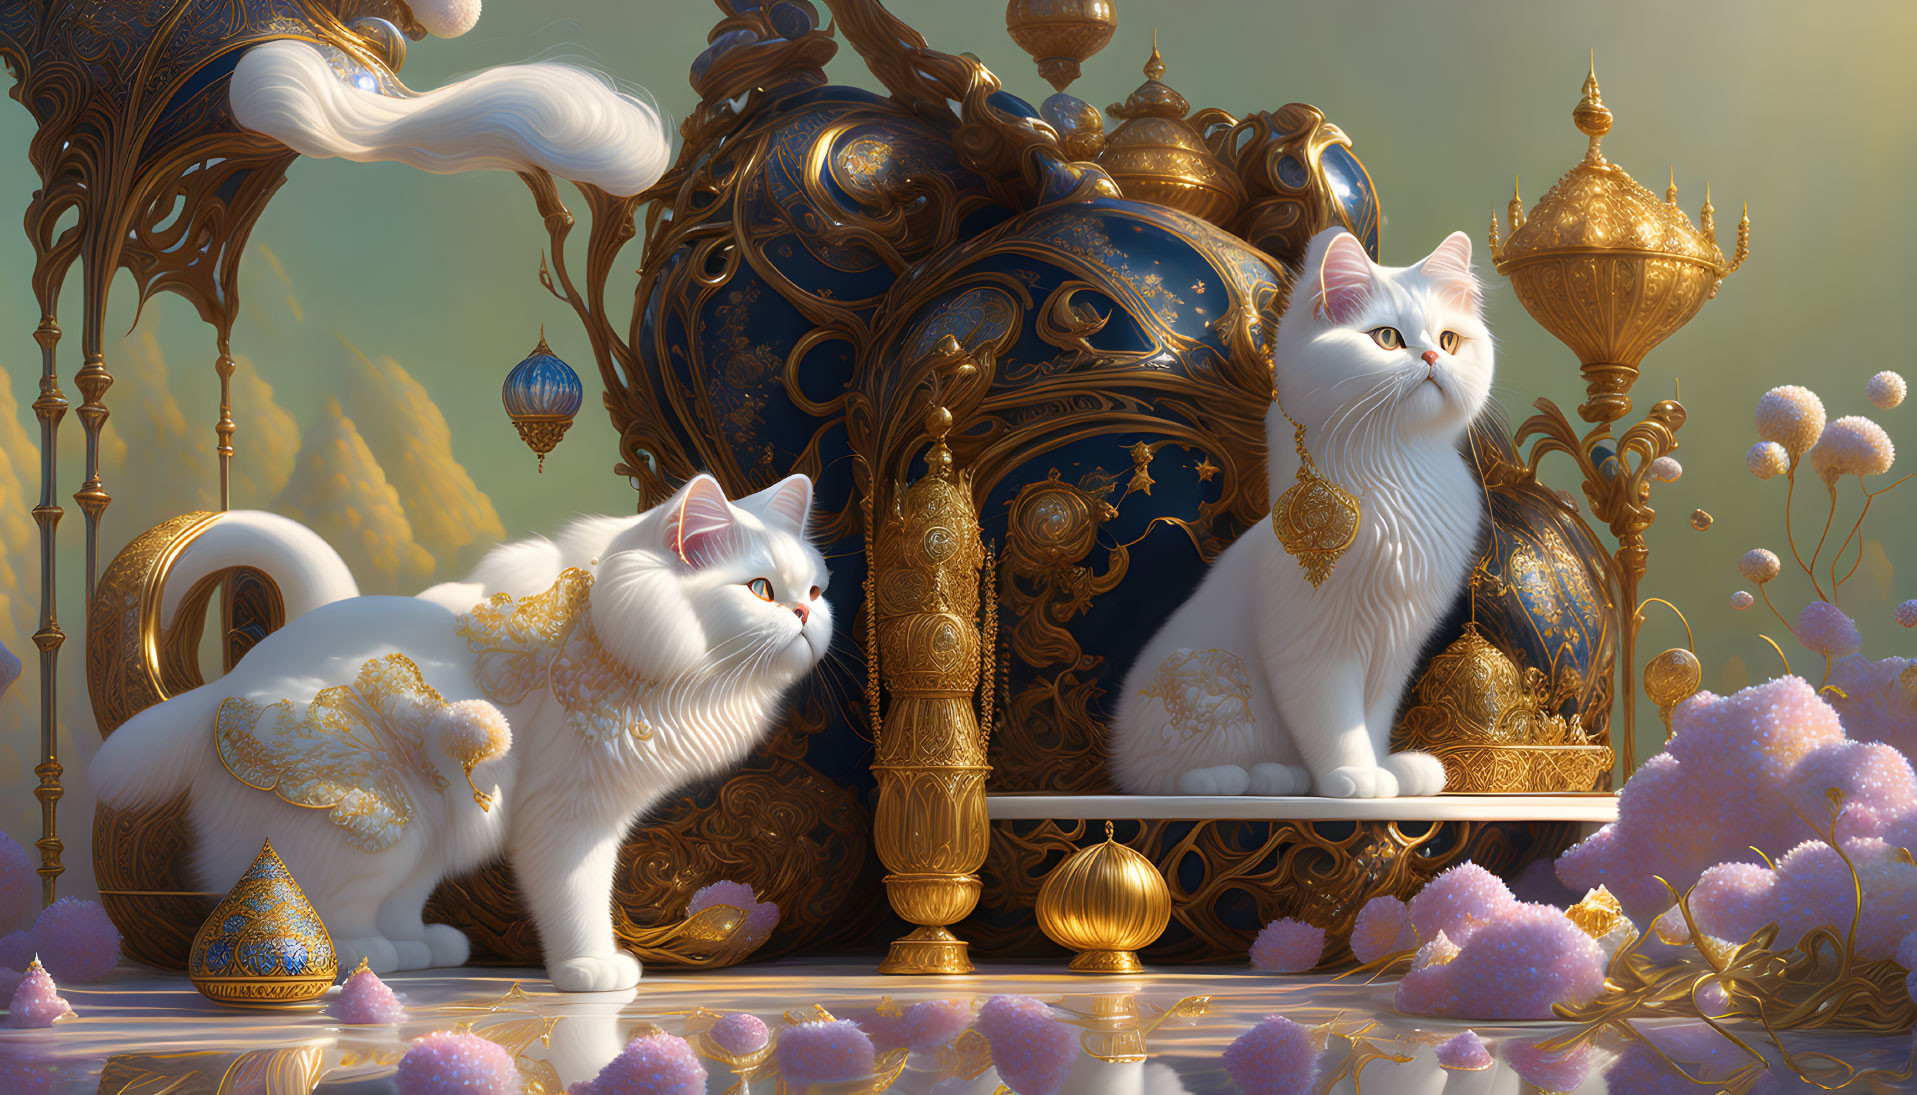 Majestic white cats with golden accents in fantastical setting